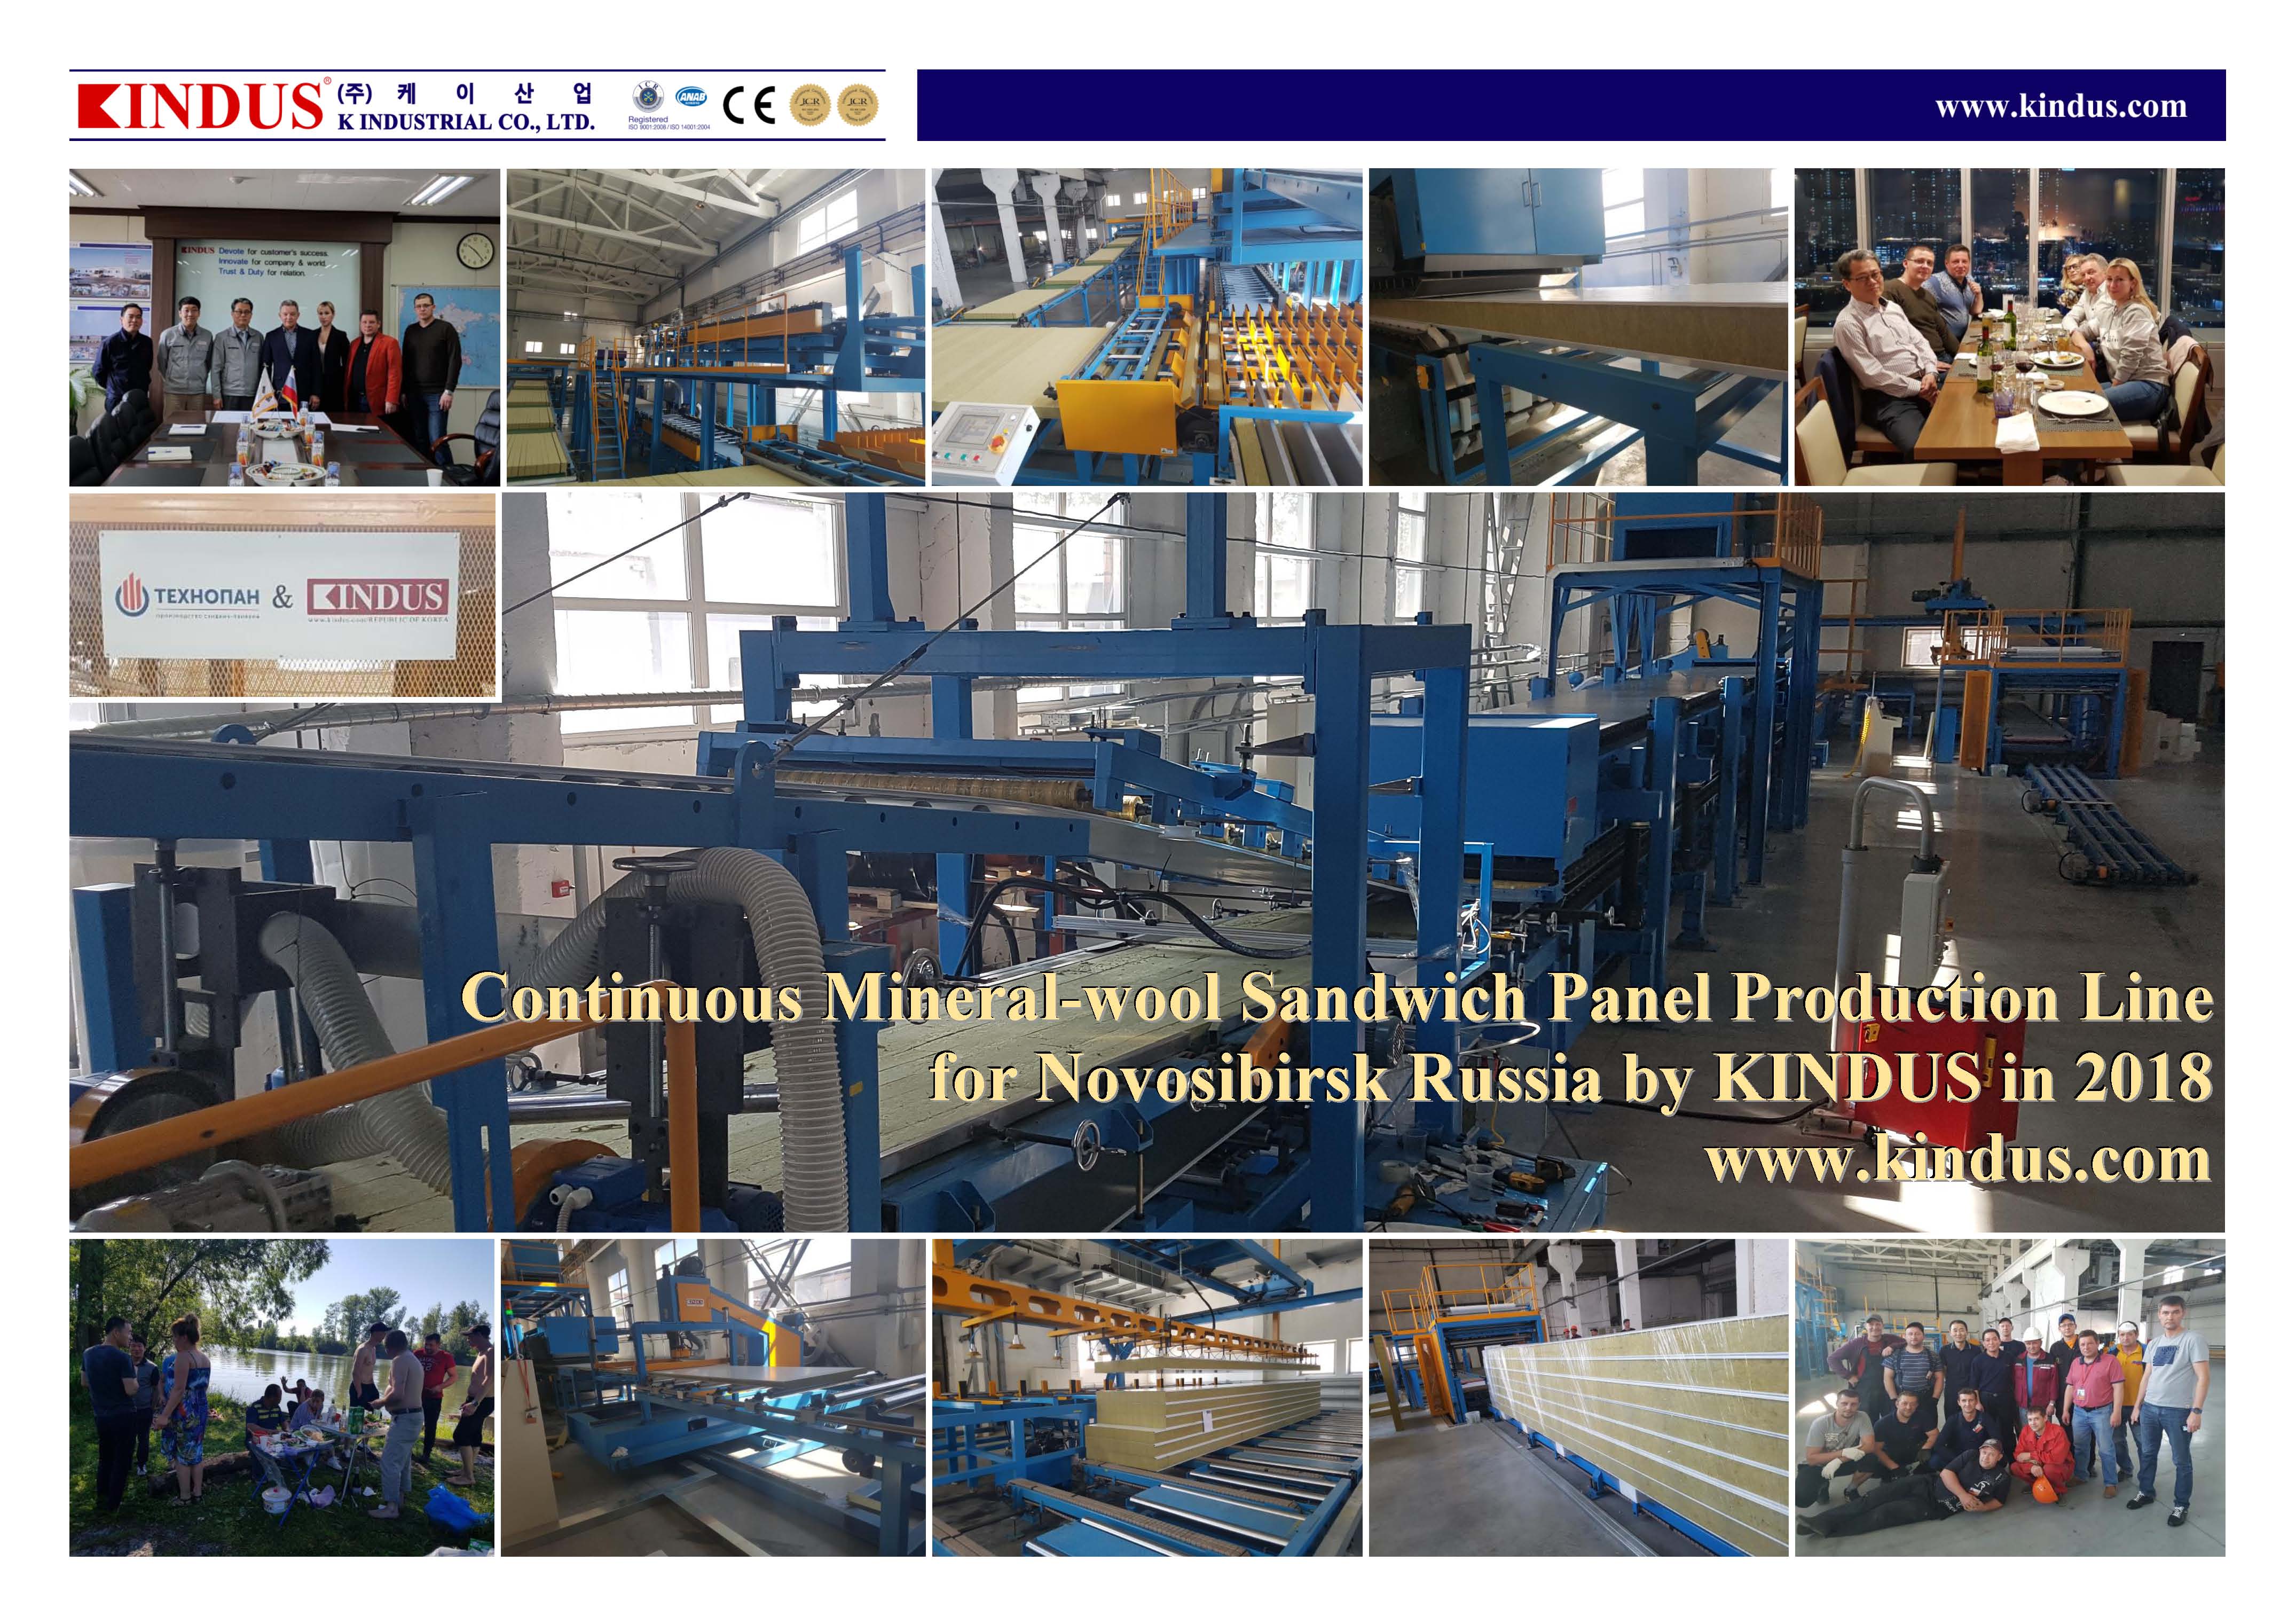  Mineral-wool sandwich panel production line